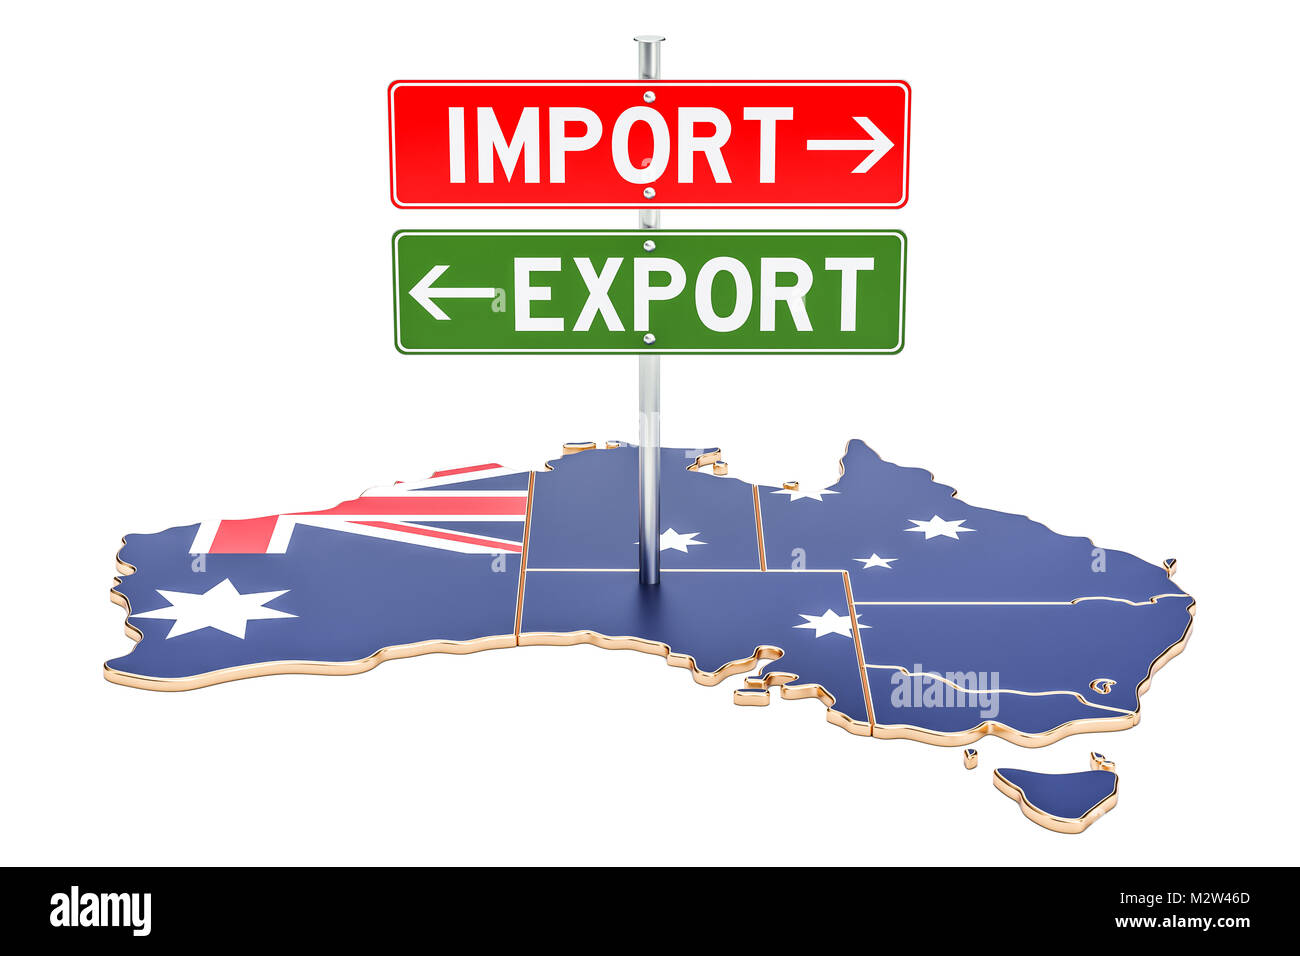 Import and export in Australia concept, 3D rendering isolated on white background Stock Photo